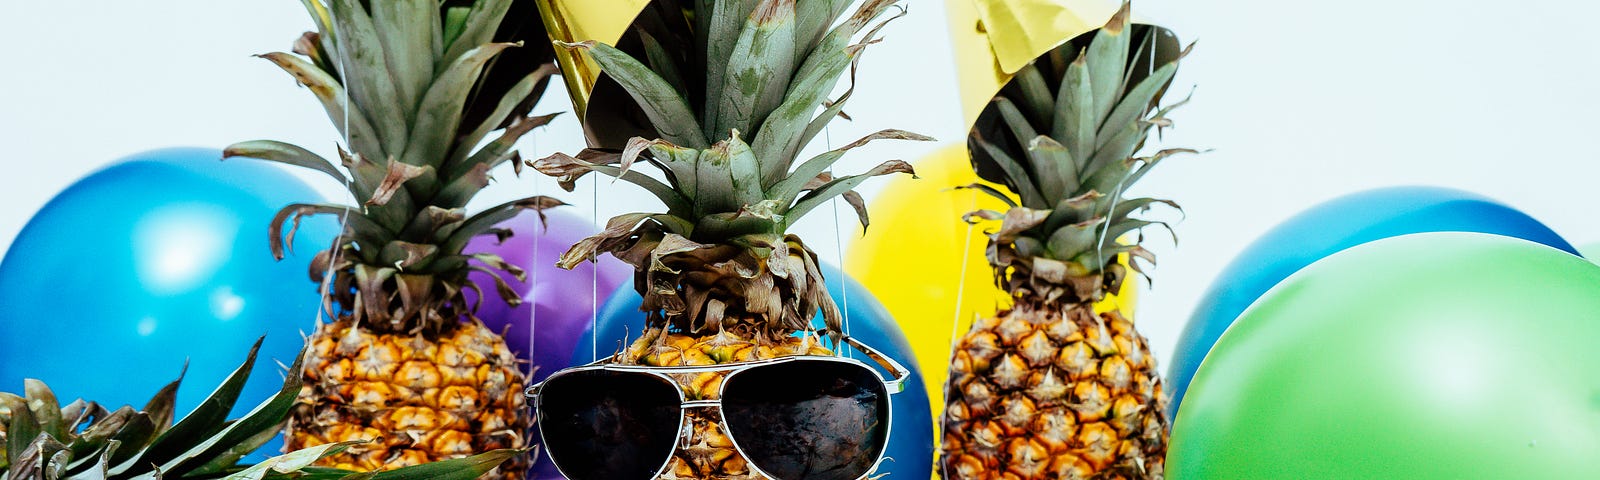 Pineapples with sunglasses on and balloons